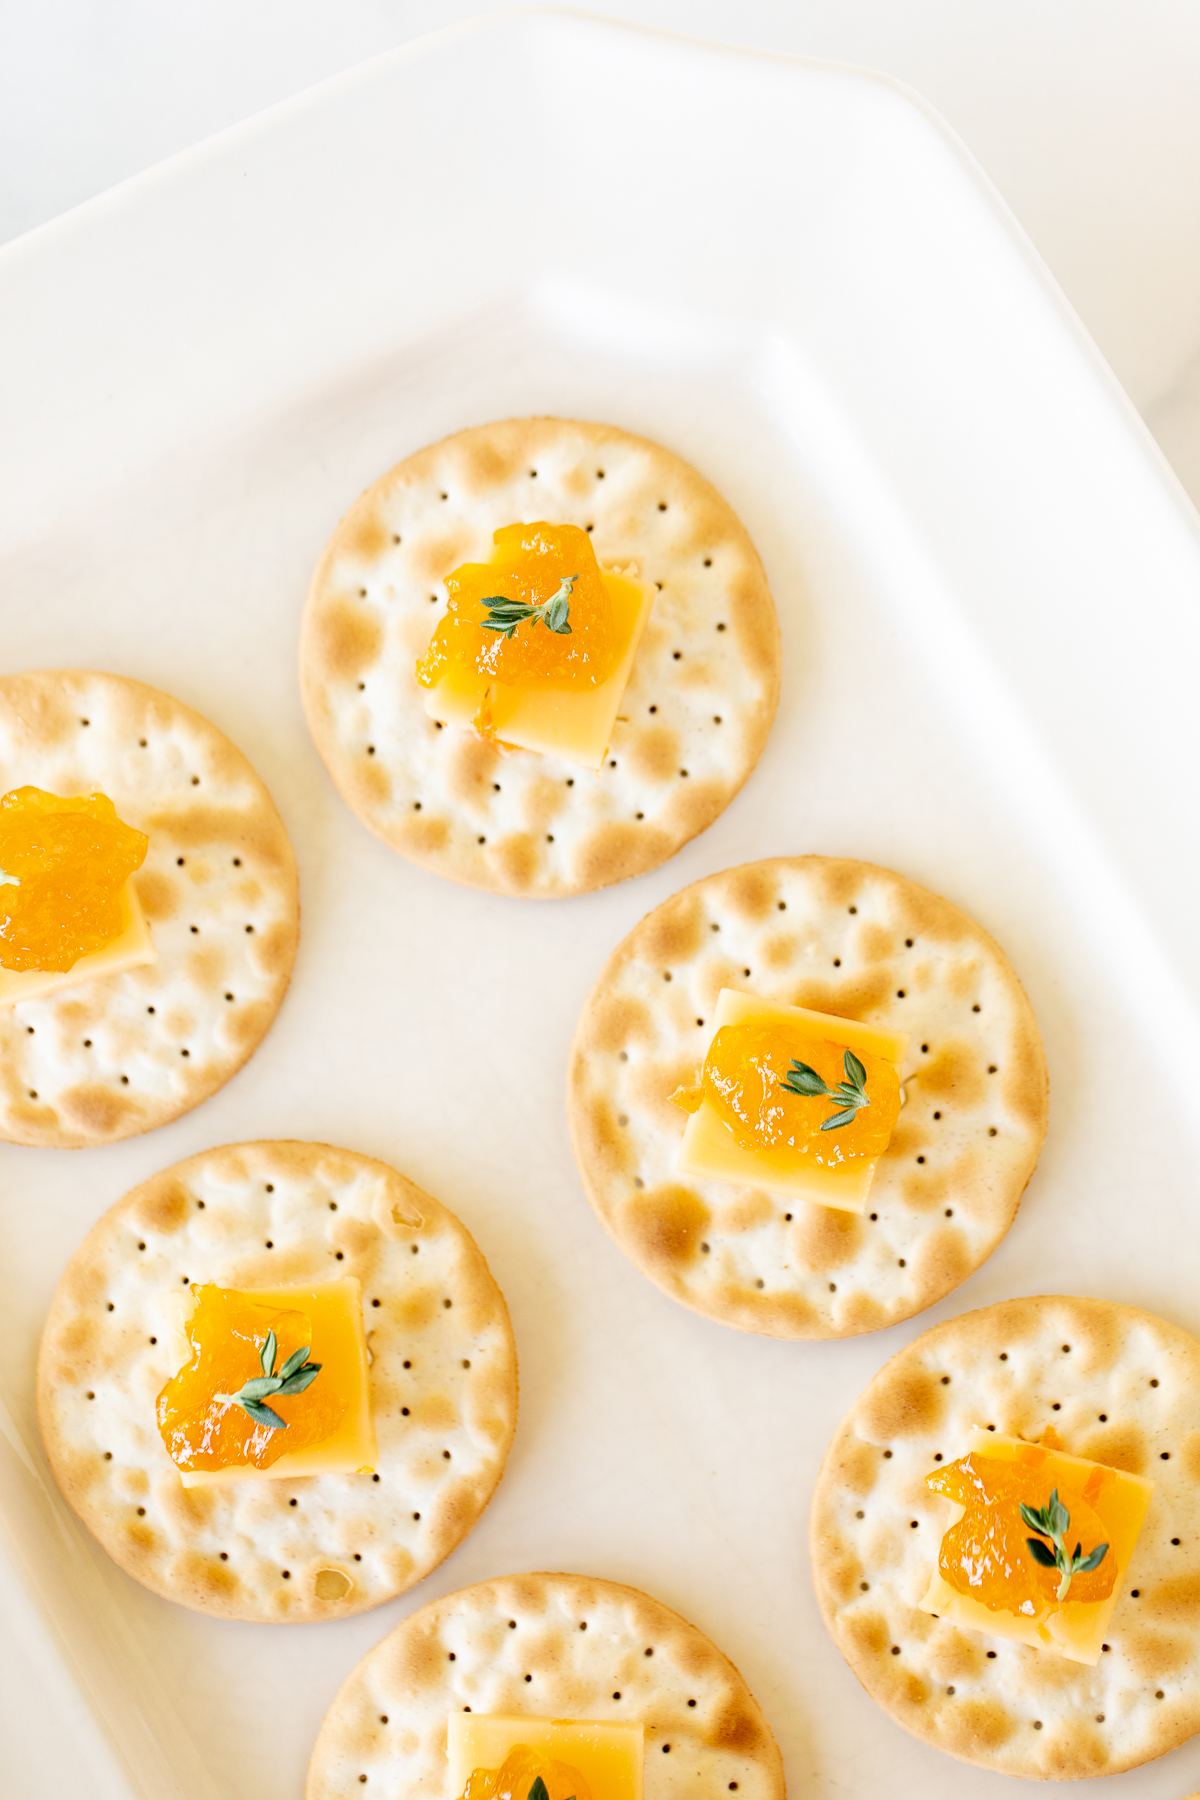 cheese and crackers topped with jelly on a white plate.